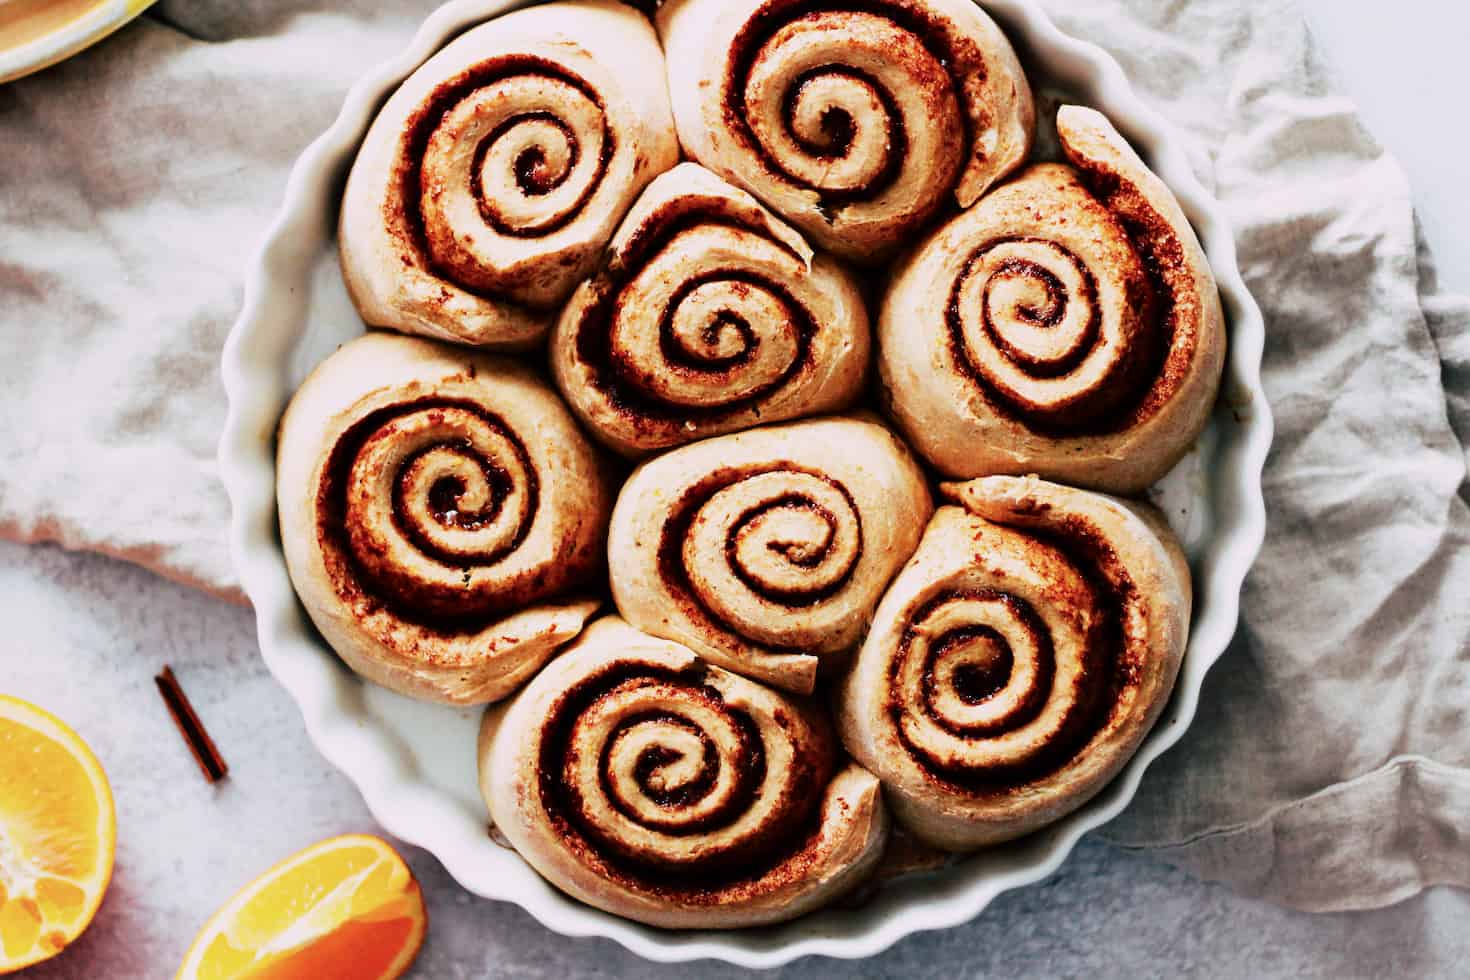 Horizontal image of cinnamon rolls in a white, round baking dish.